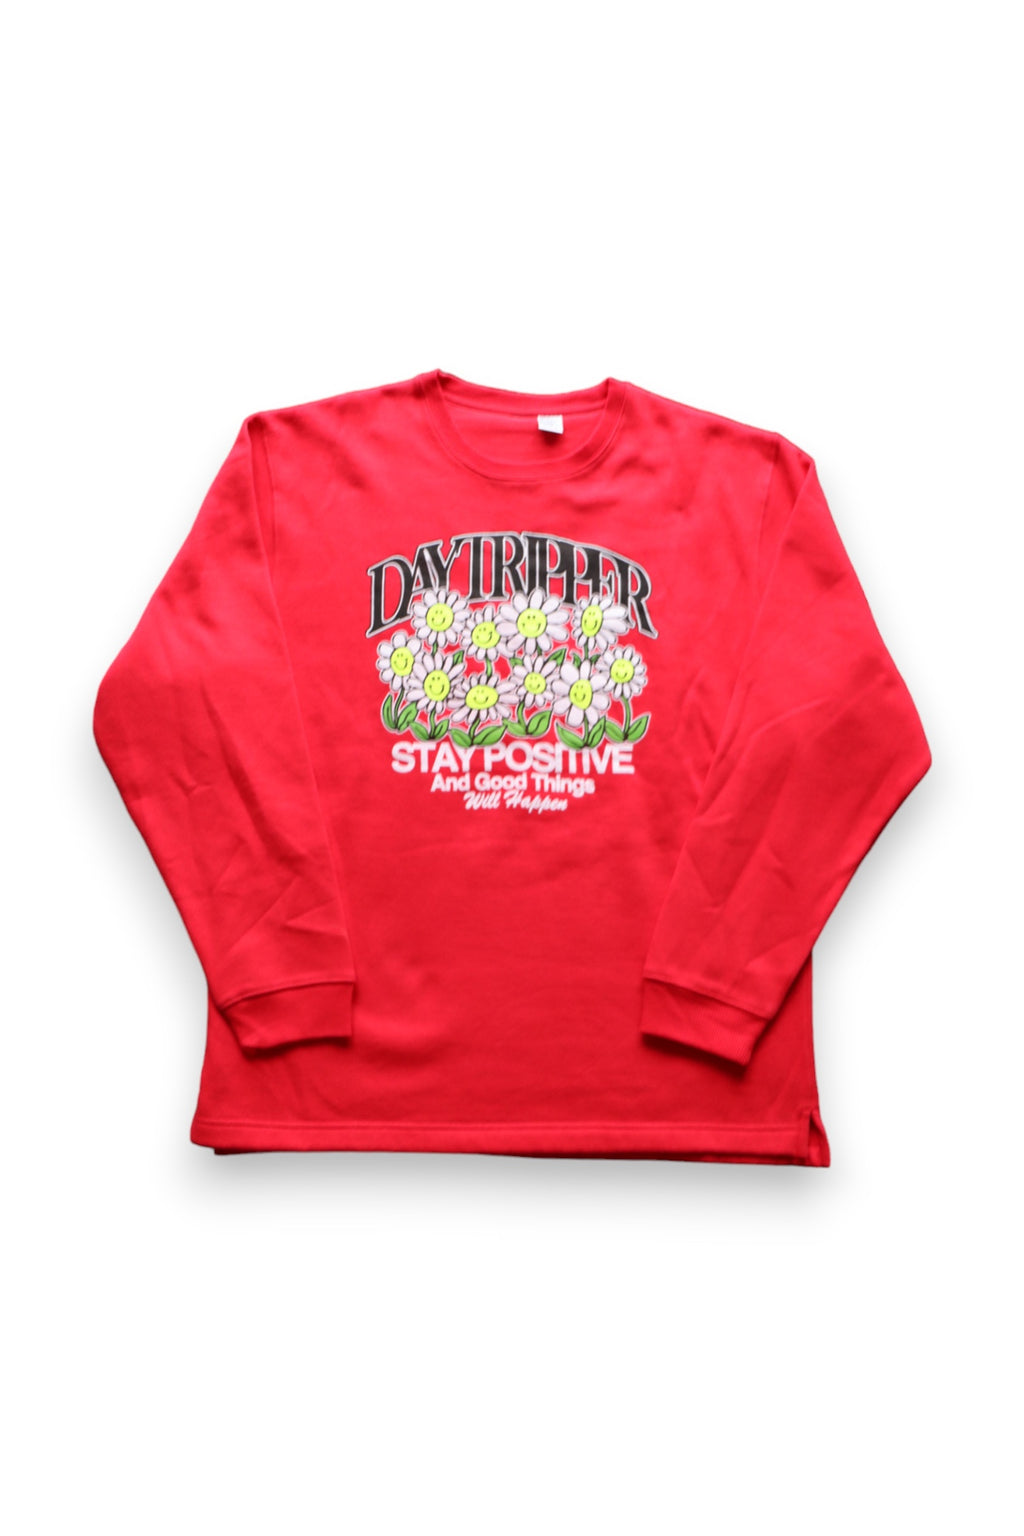 STAY POSITIVE CREWNECK - RED